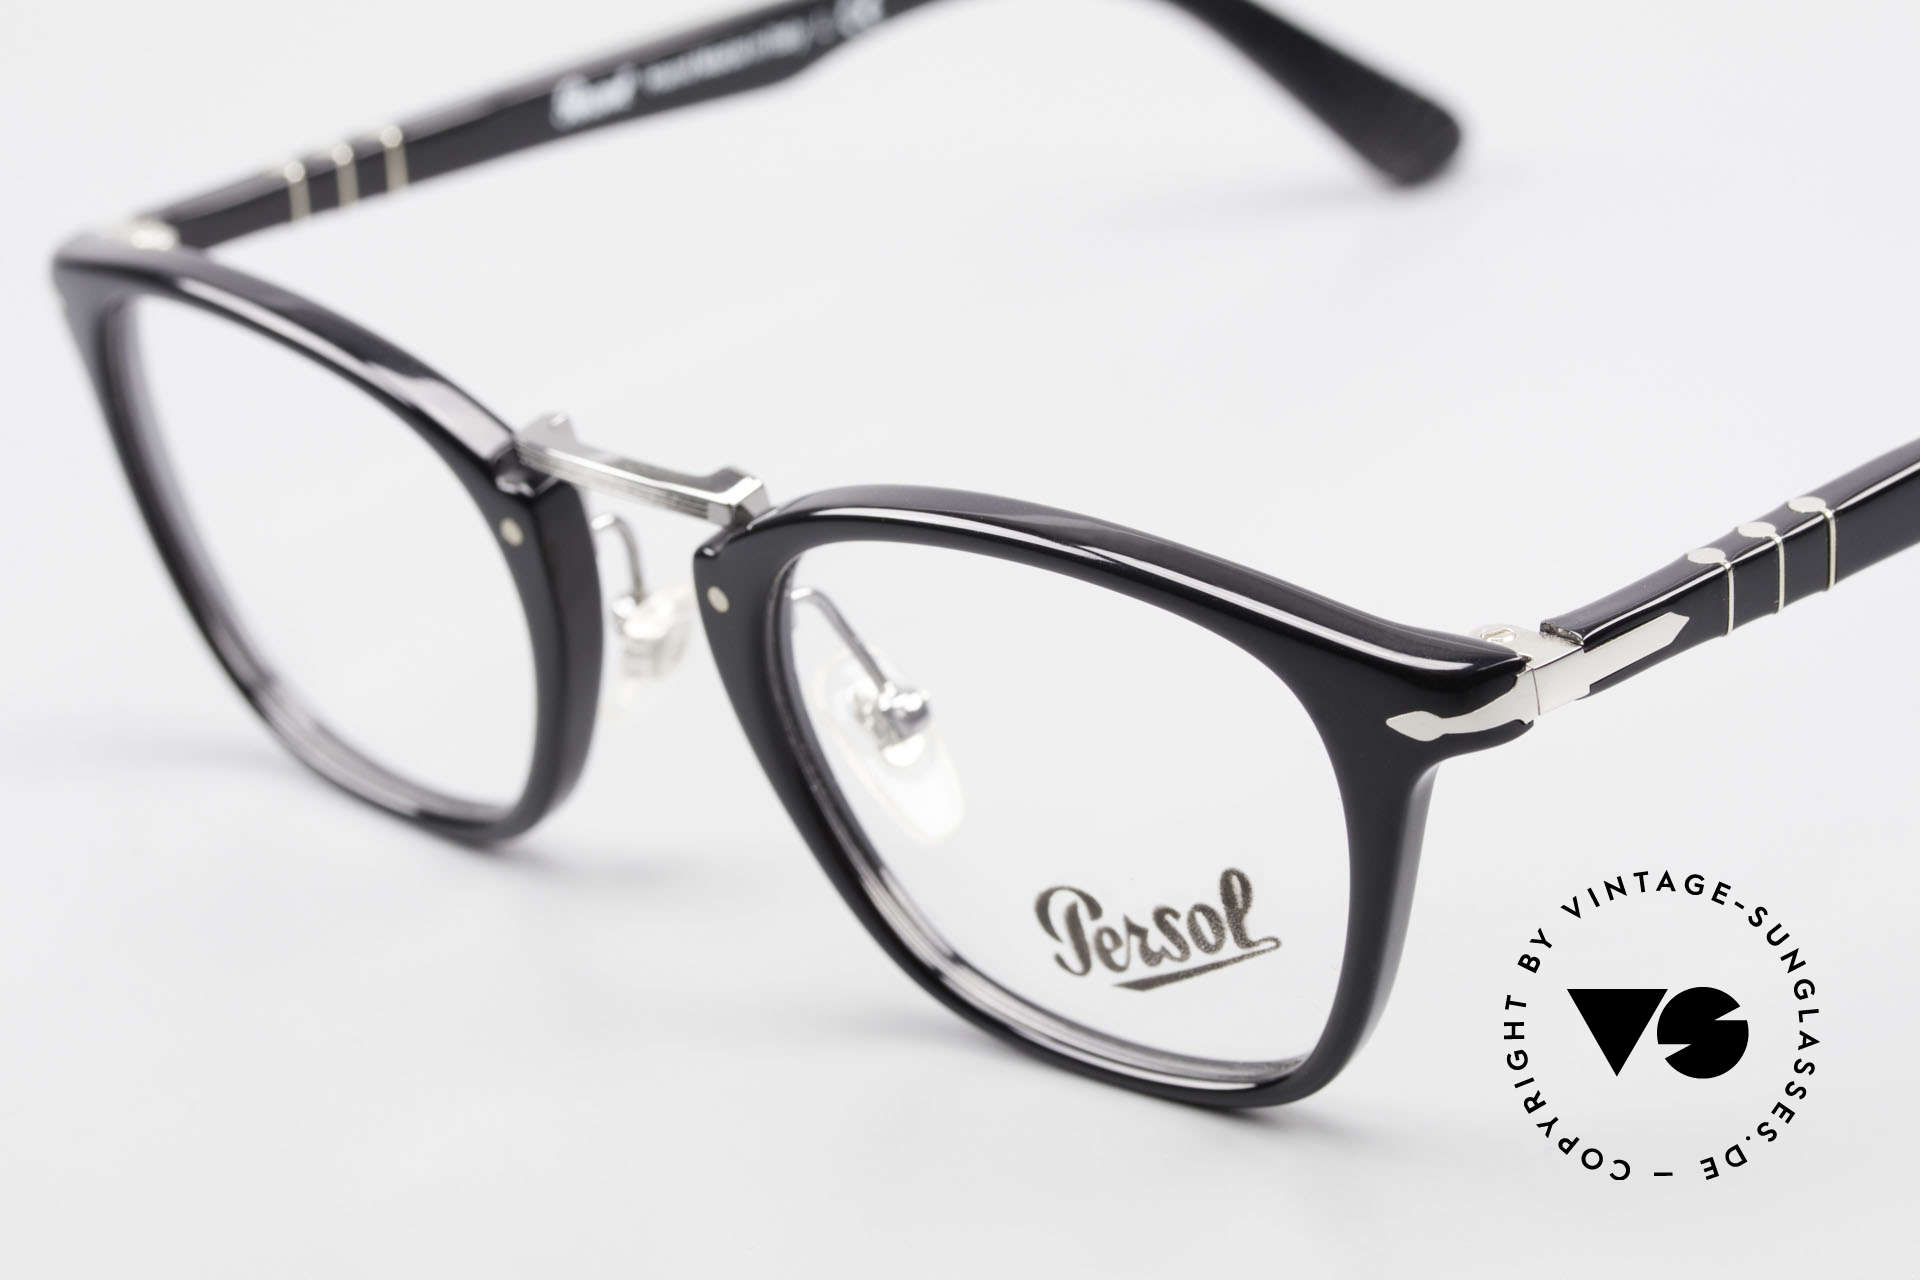 Persol 3109 Typewriter Edition Eyewear, reissue of the old vintage Persol RATTI models, Made for Men and Women